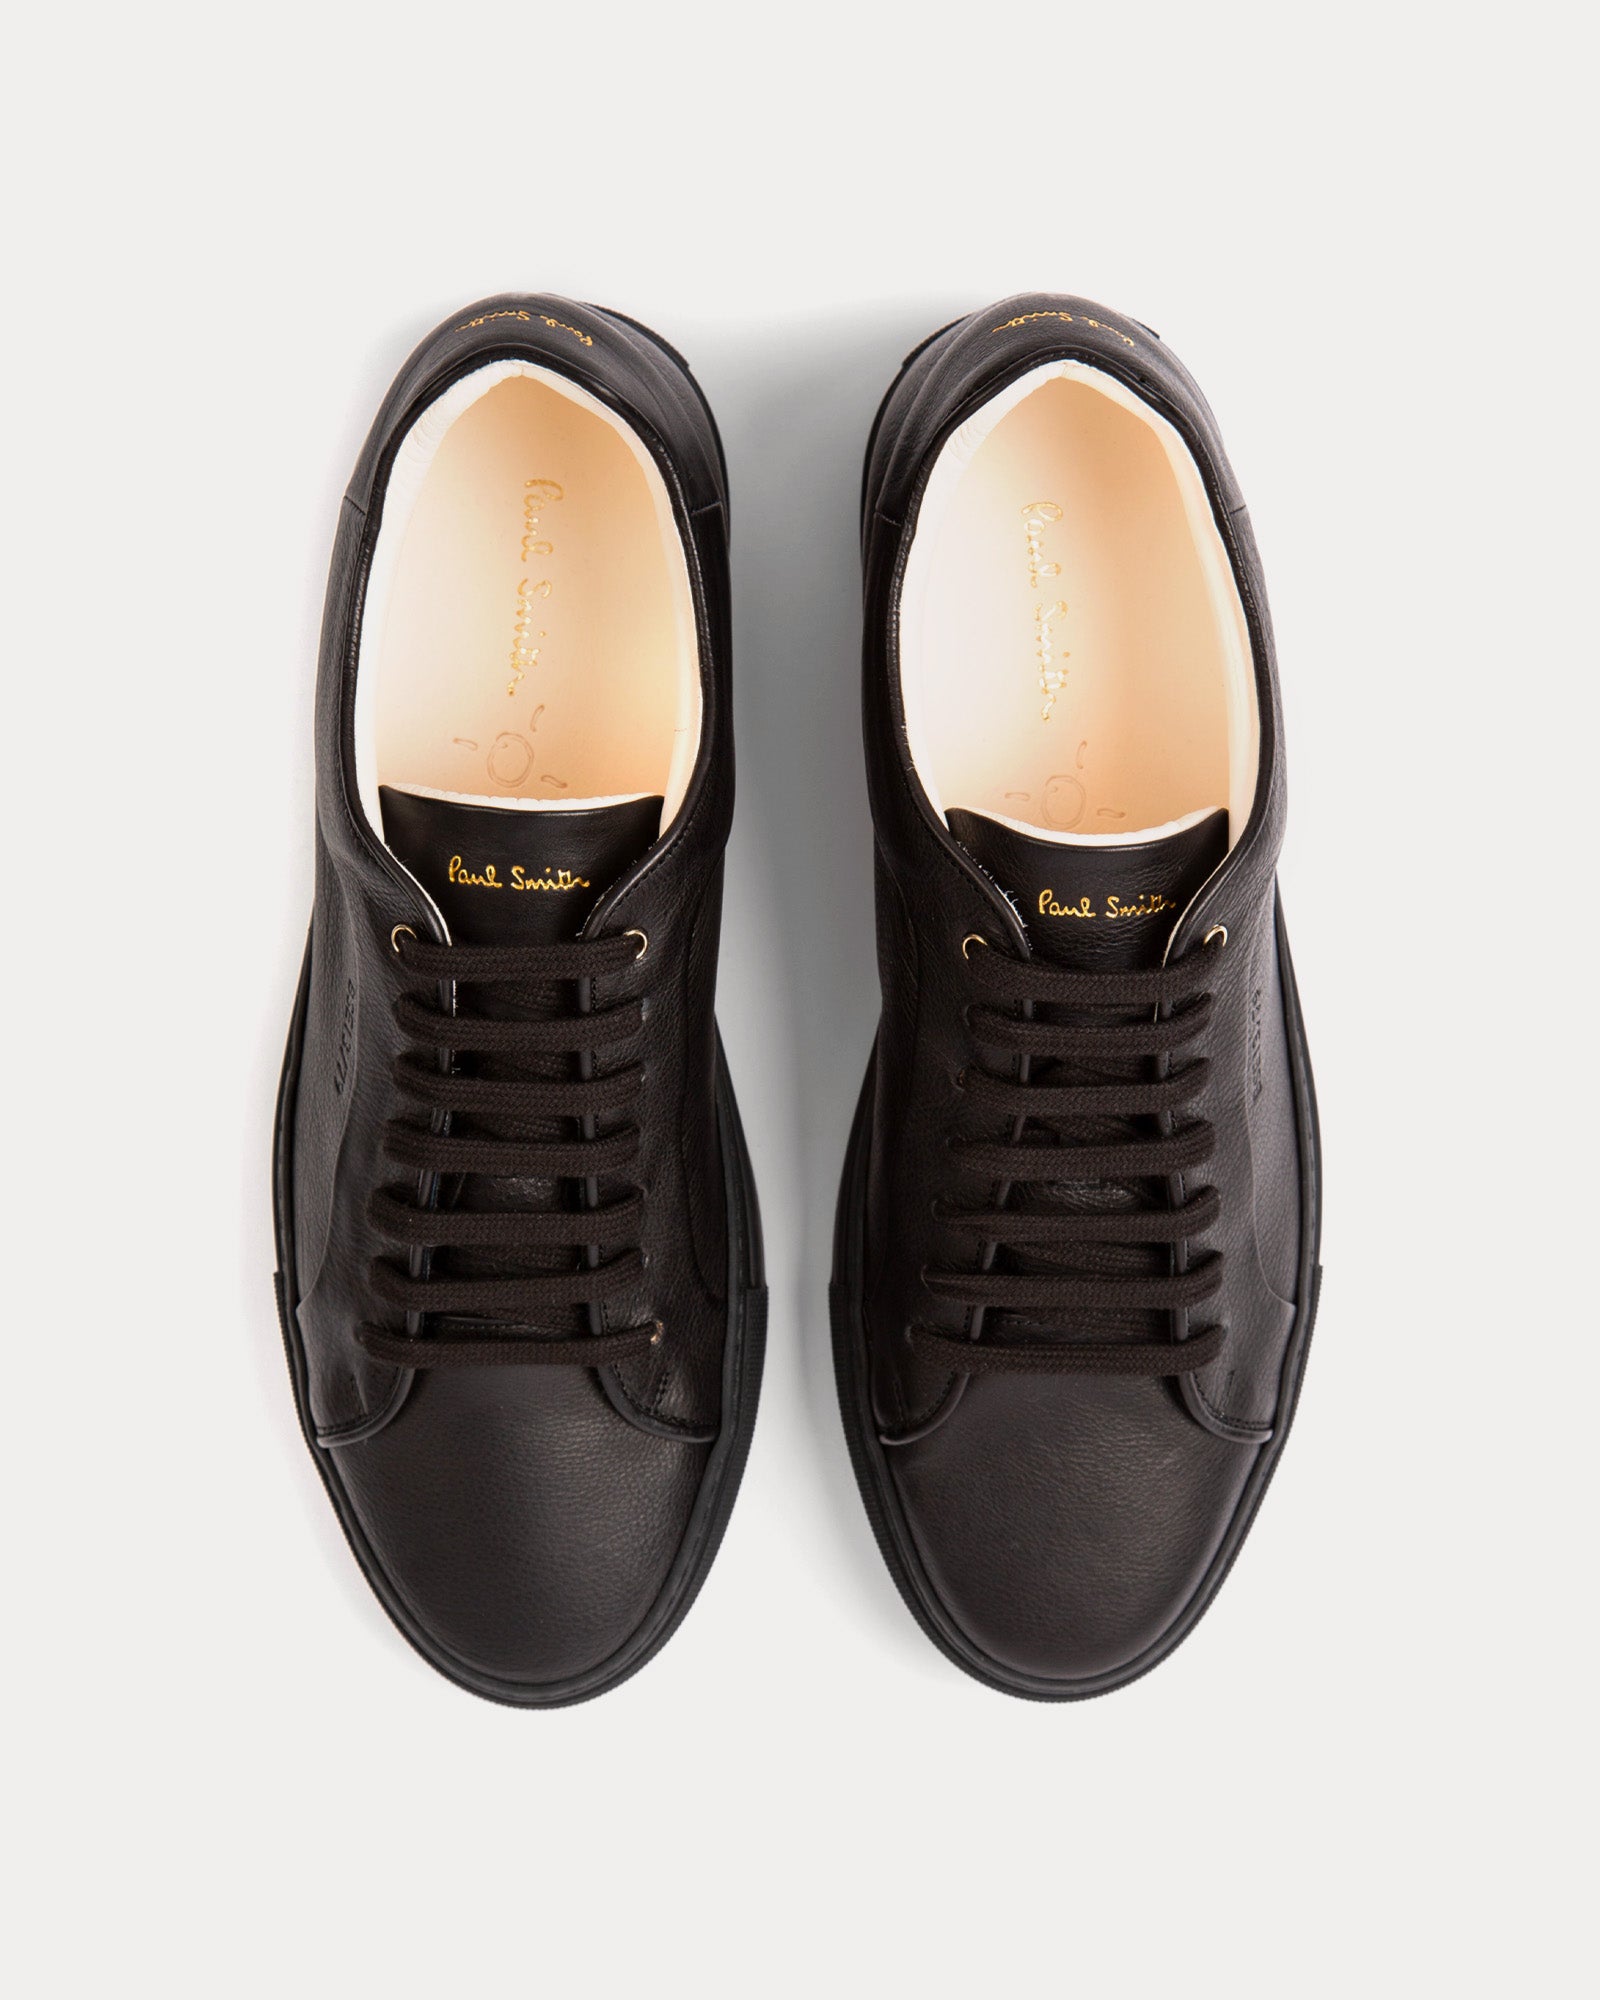 Paul Smith - Basso Eco Leather Black Low Top Sneakers